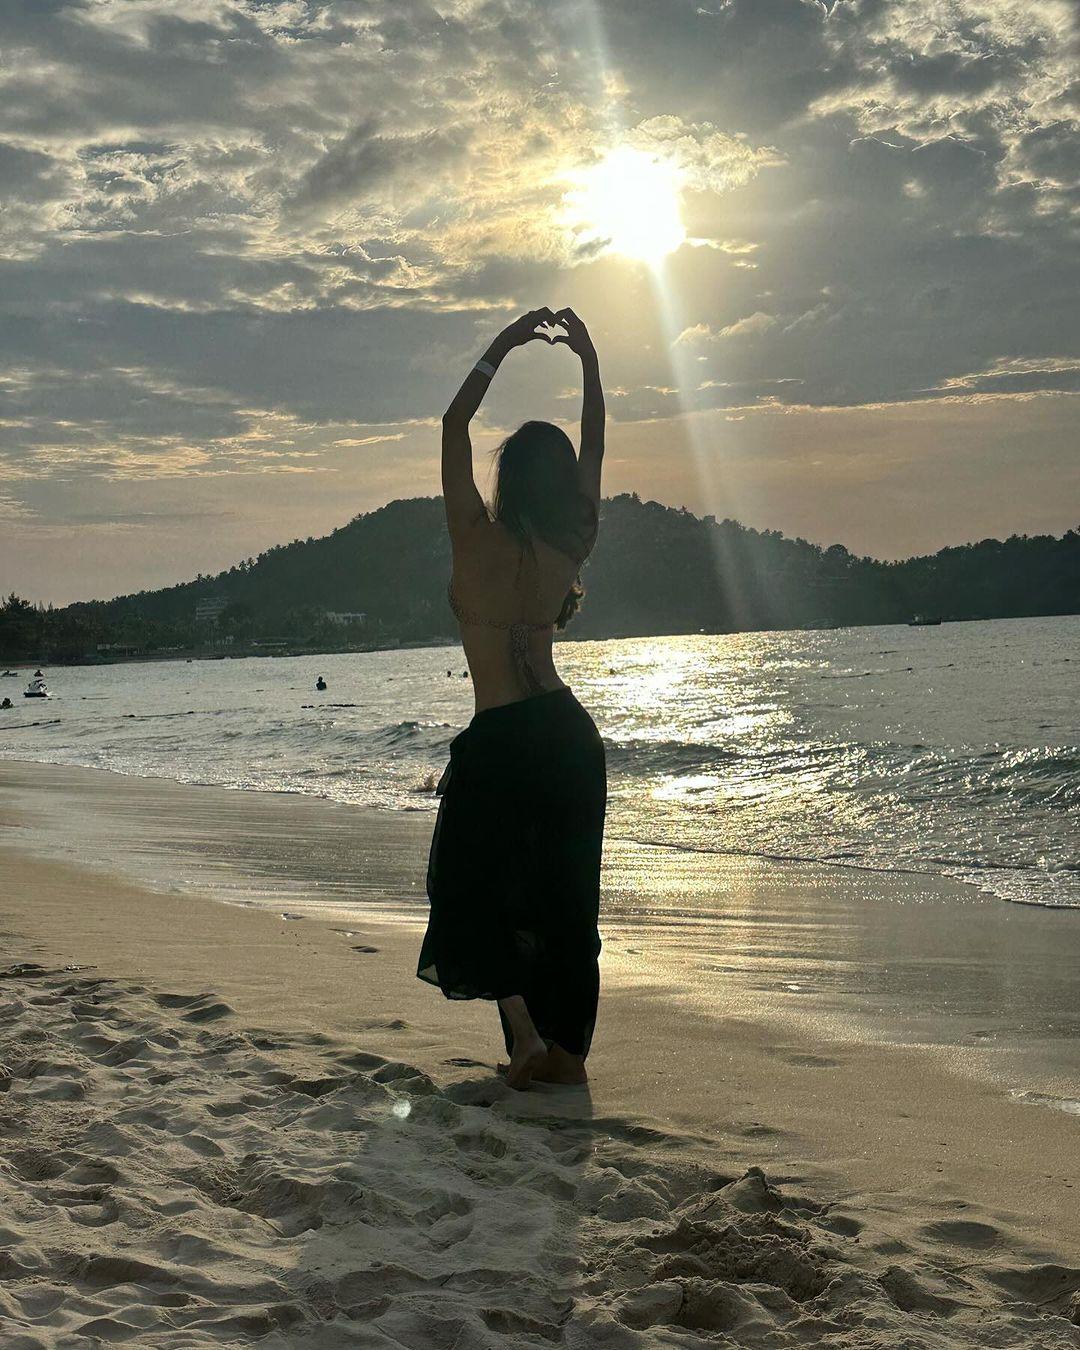 Mouni Roy shared this photo of her posing by the beach, making a heart with her hands. Her silhouette looks stunning against the sun